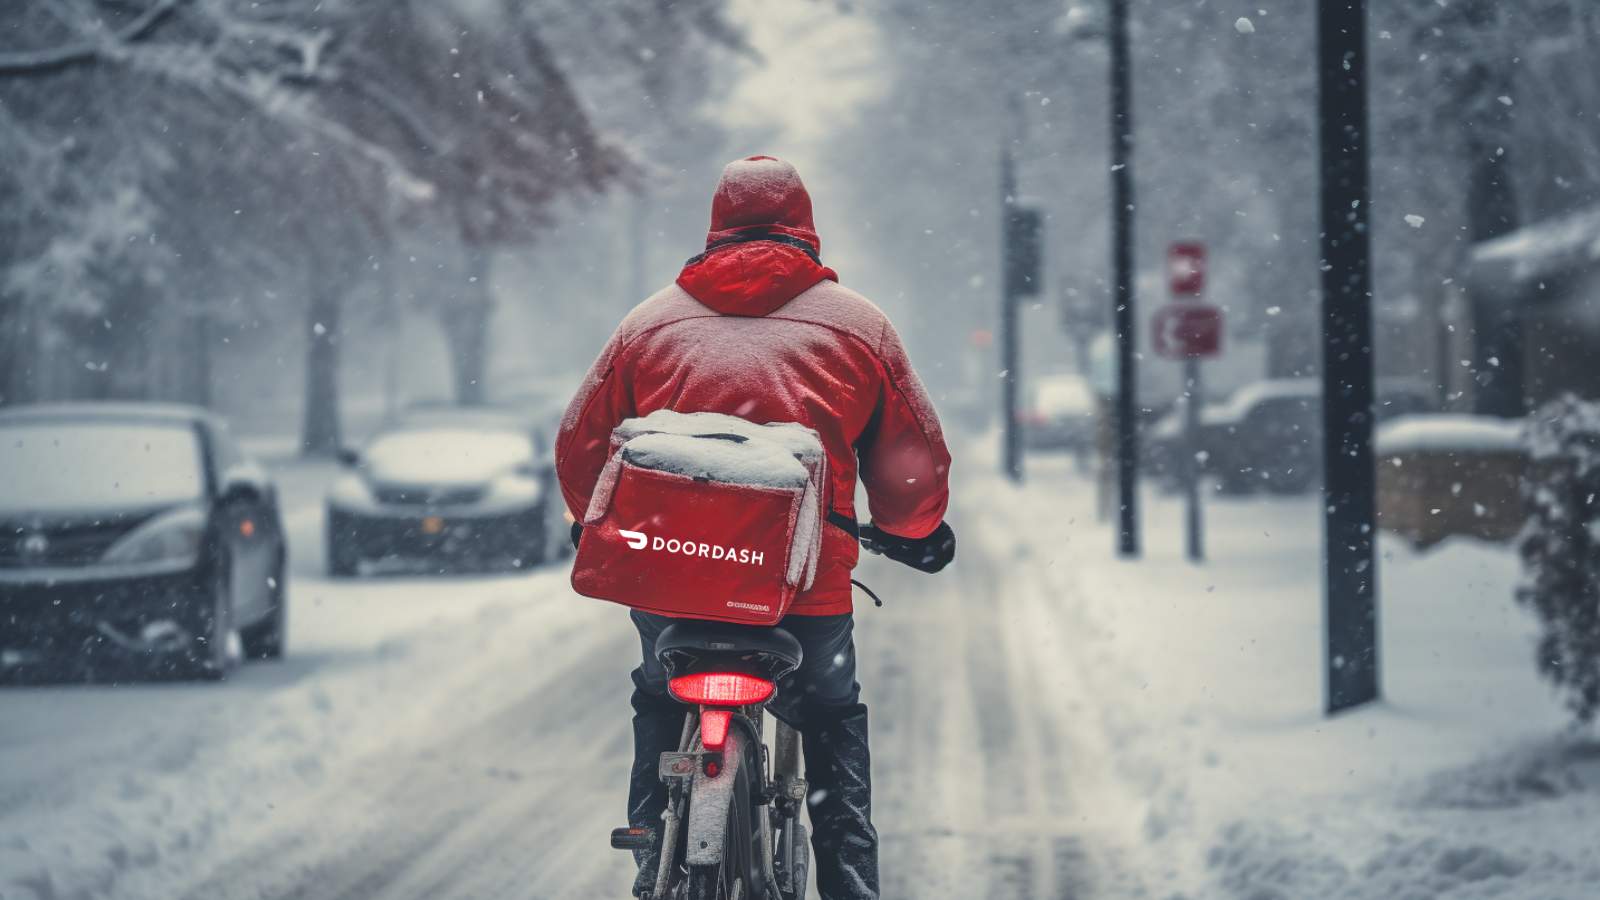 man delivers a doordash order on a bike in snowy weather 